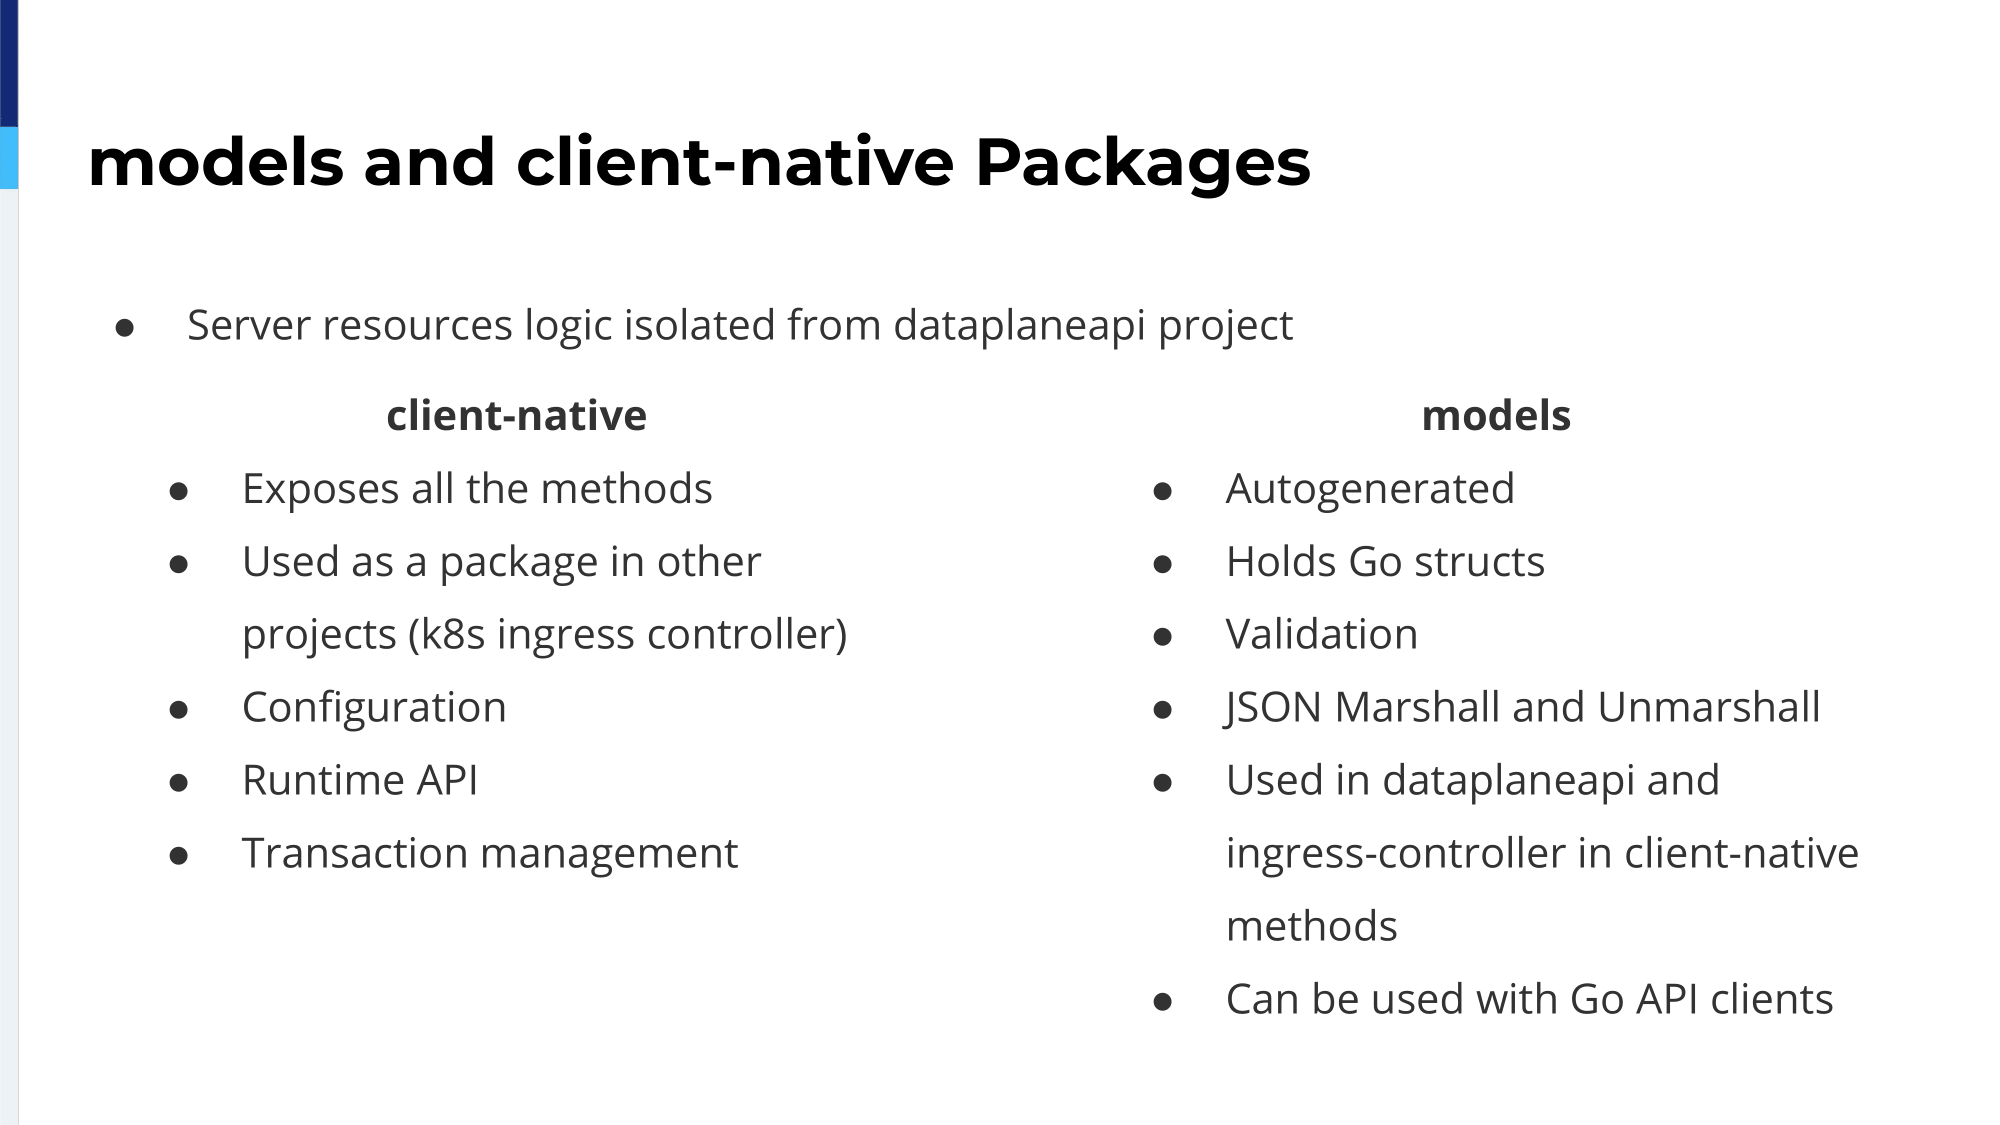 5.-models-and-client-native-packages-1675703805